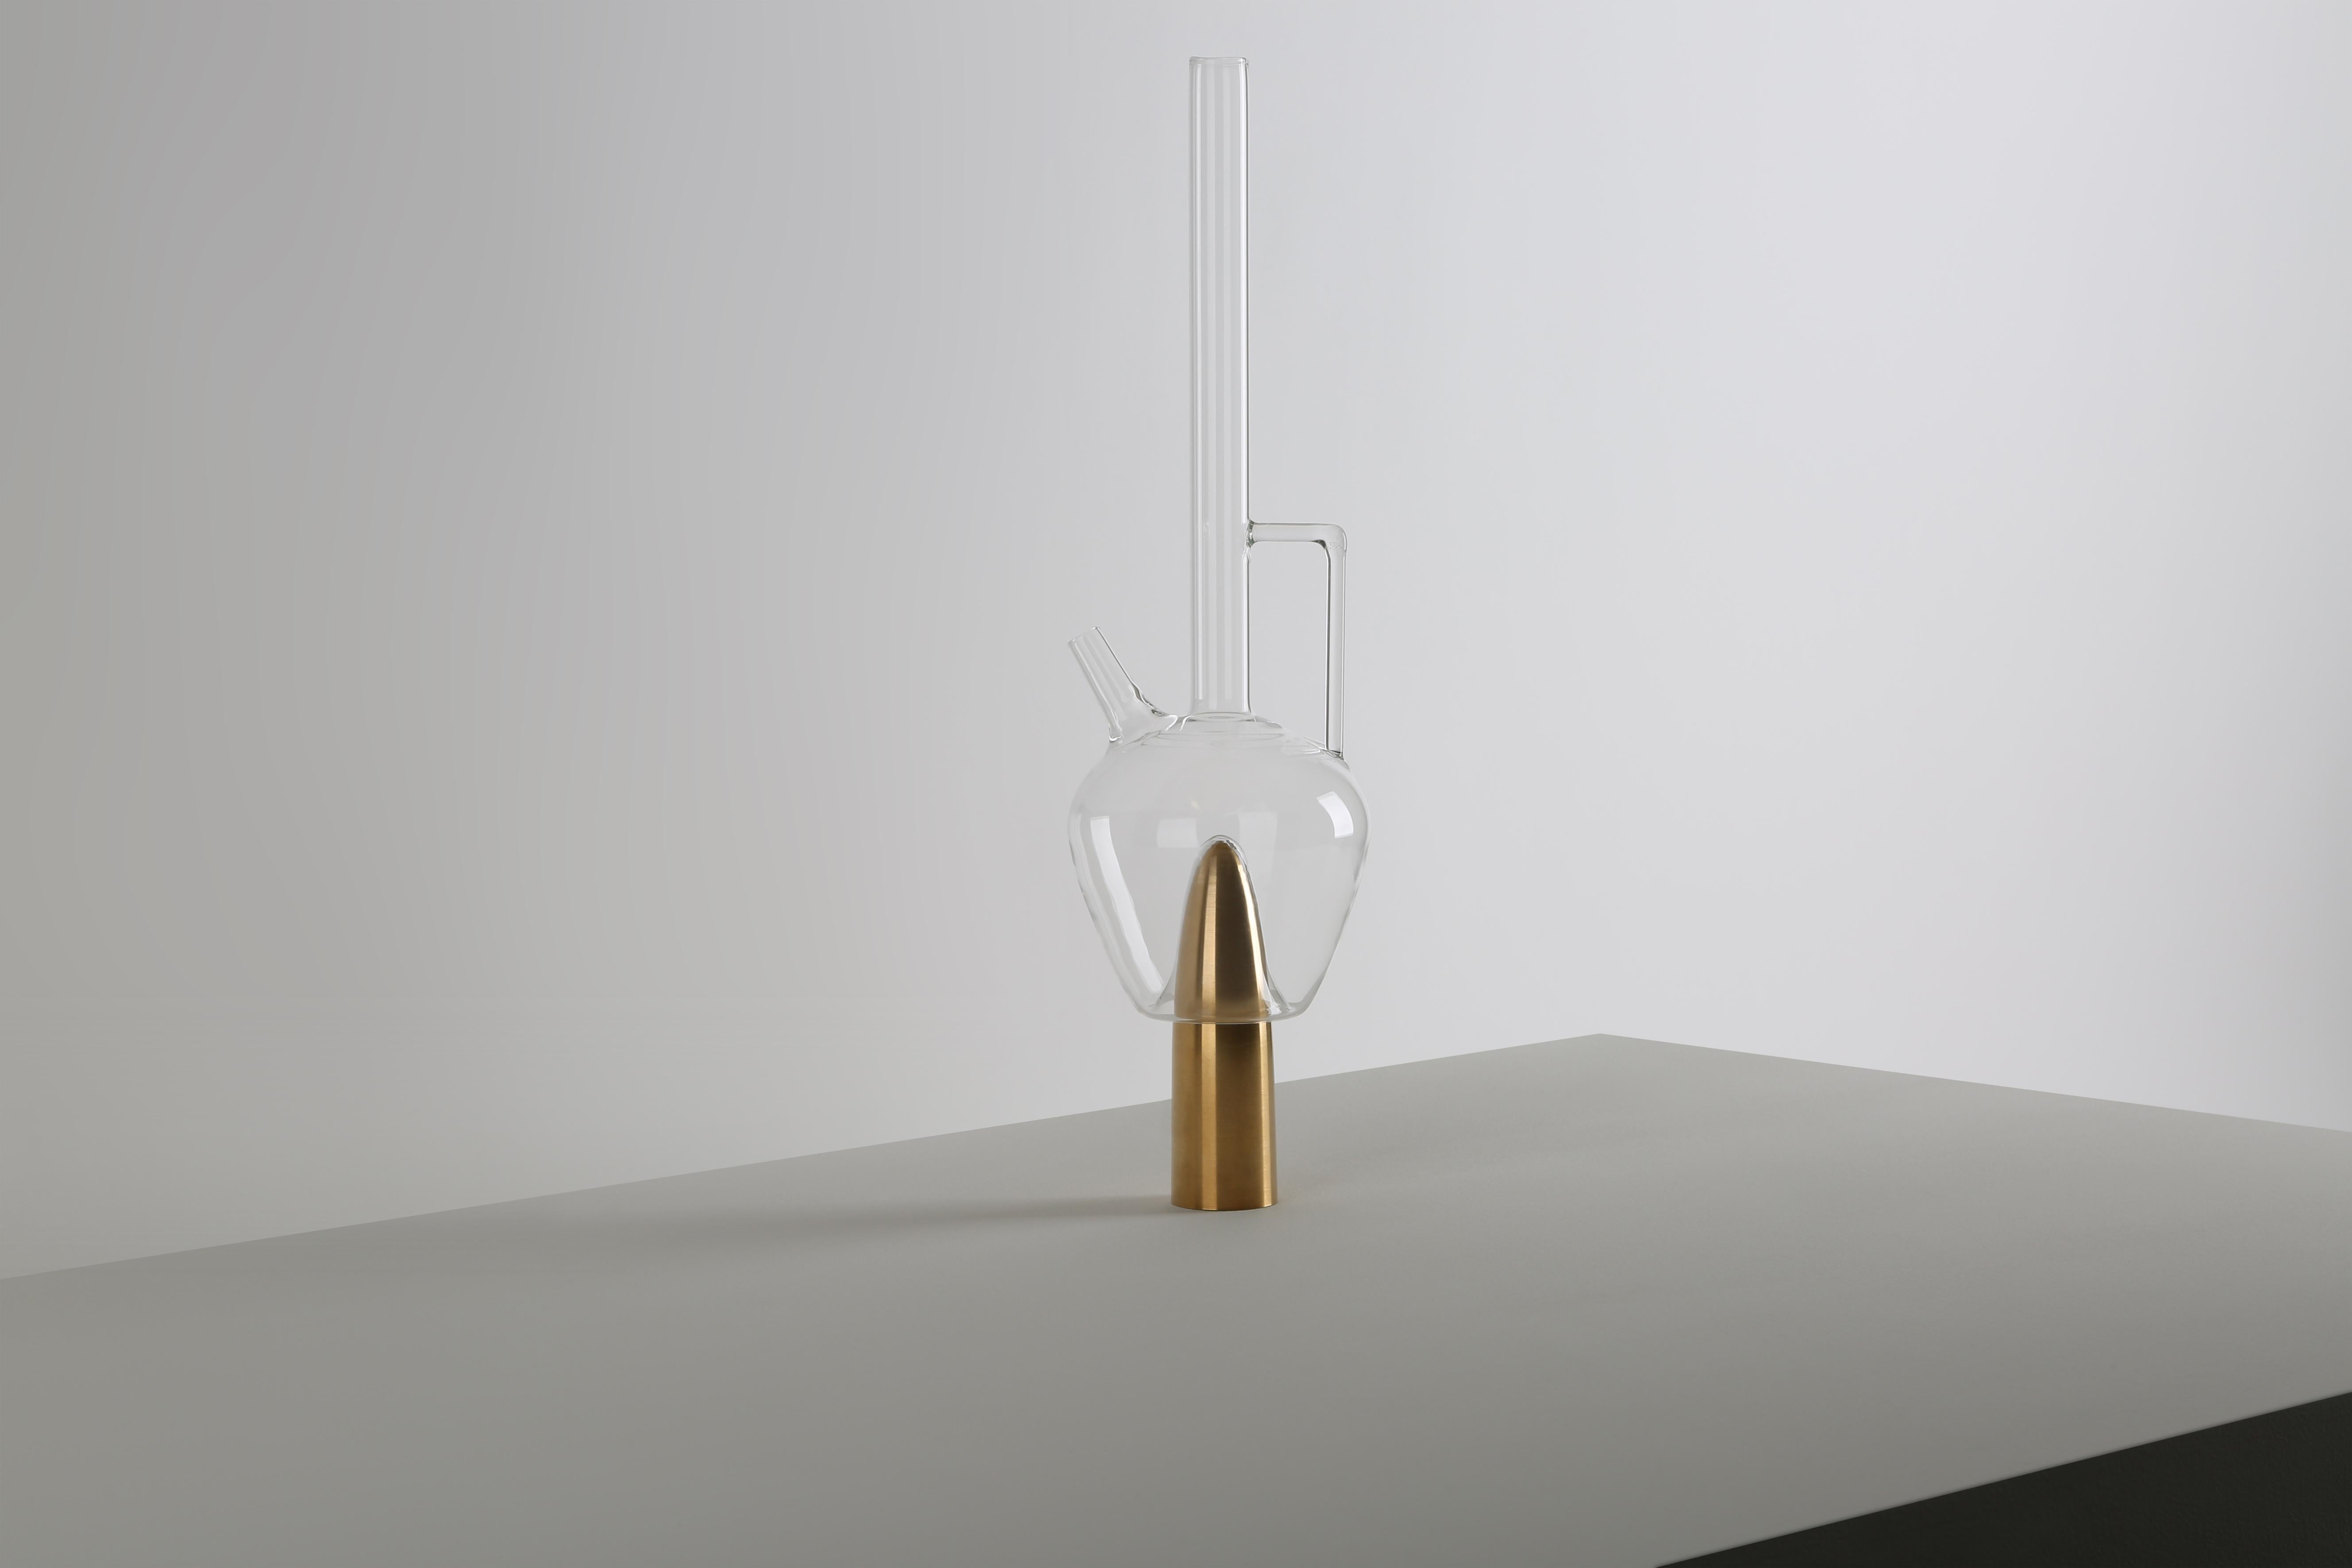 Plugged Carrafe by Richard Yasmine
Materials: hand-blown borosilicate glass with solid brushed brass base
Dimensions: D 10 x H 32 cm

Made of solid brushed brass and a very thin hand-blown borosilicate glass mixed together to form one dramatically